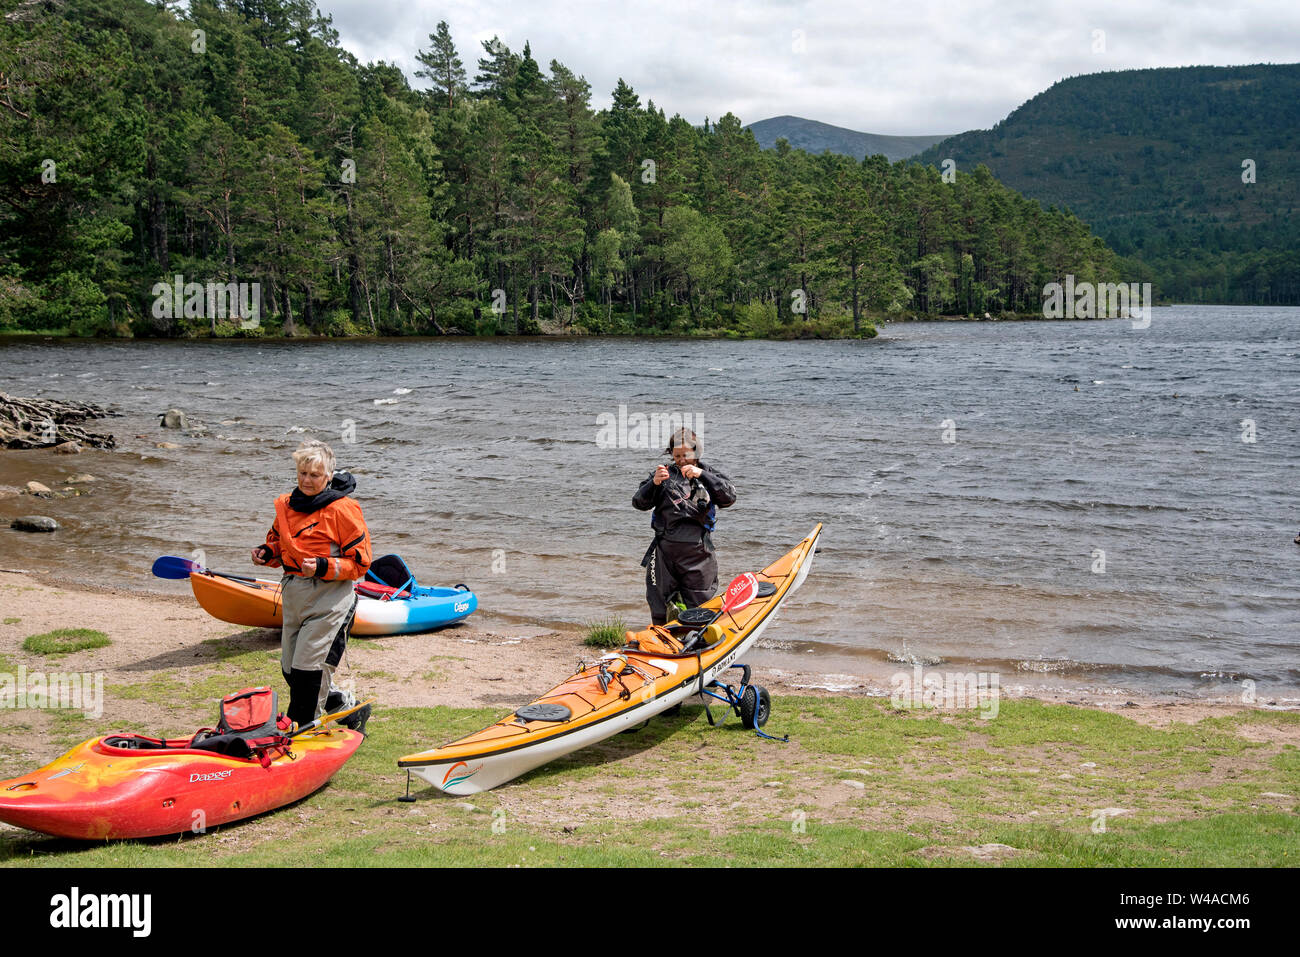 Two kayakers prepare to take to the water at Loch an Eilein in the Cairngorms National Park, Scotland, UK. Stock Photo